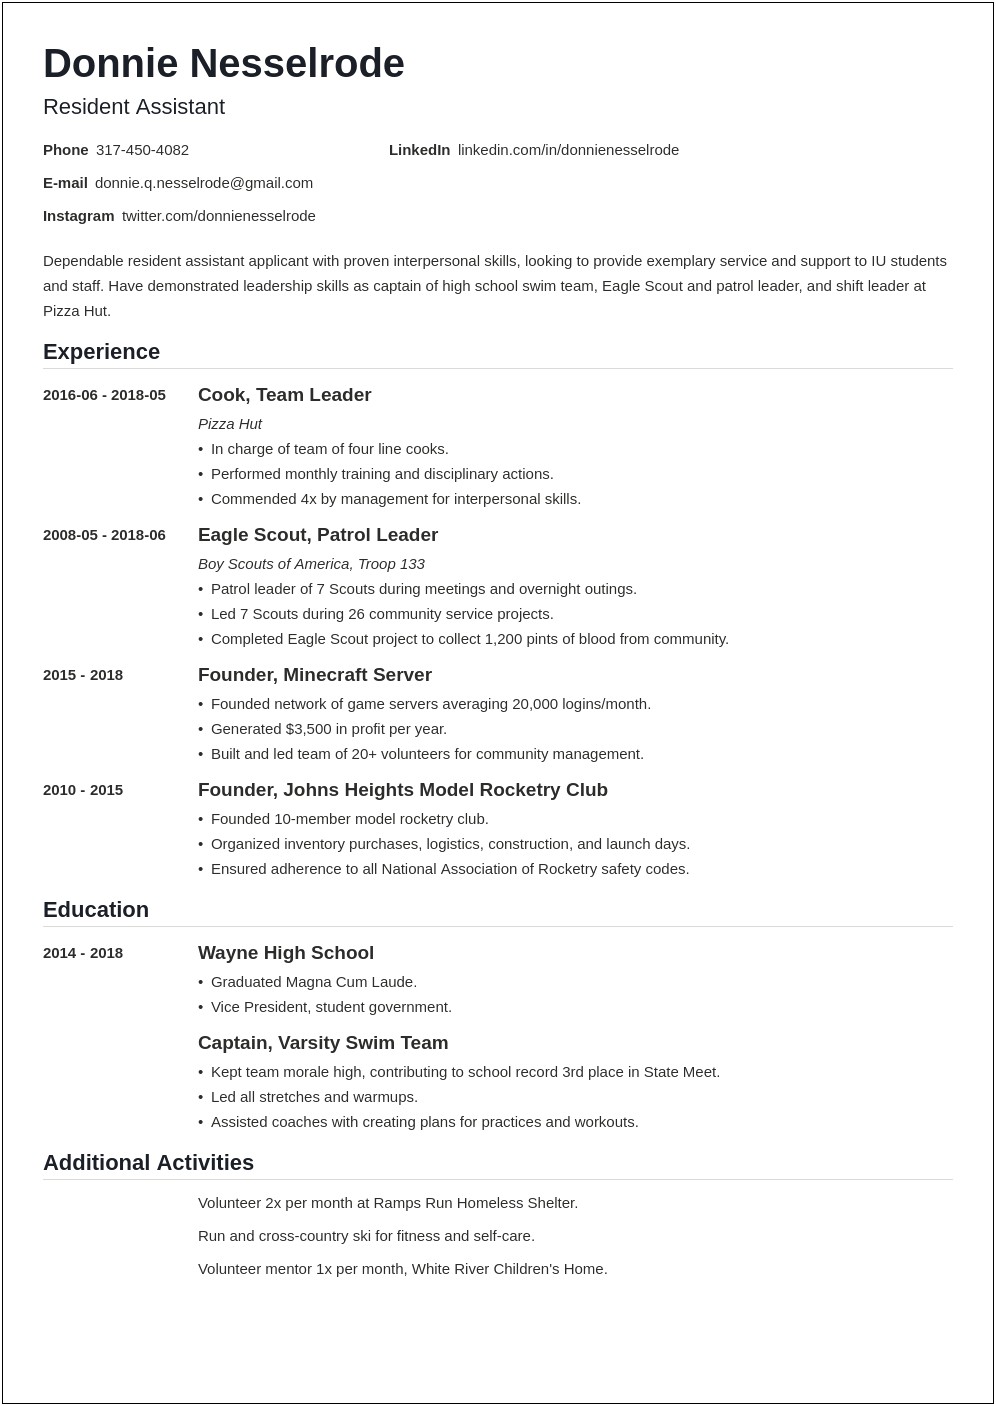 Resume Objectives For Resident Counselor